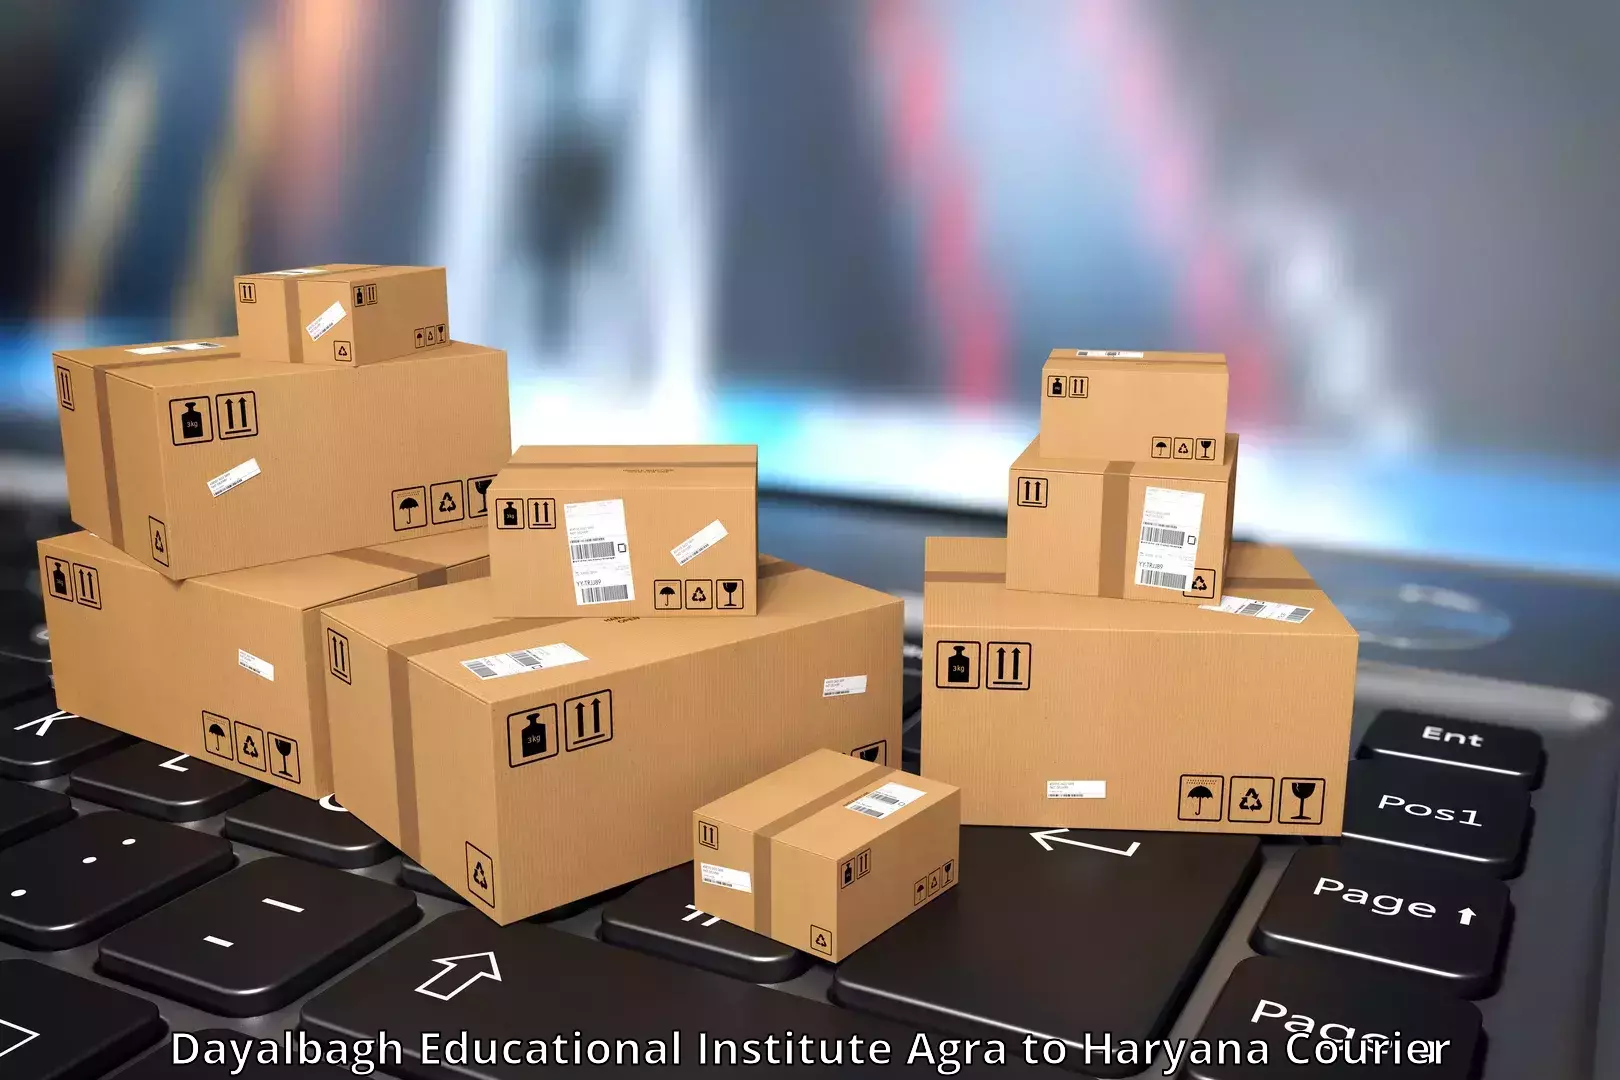 Same day shipping Dayalbagh Educational Institute Agra to Haryana